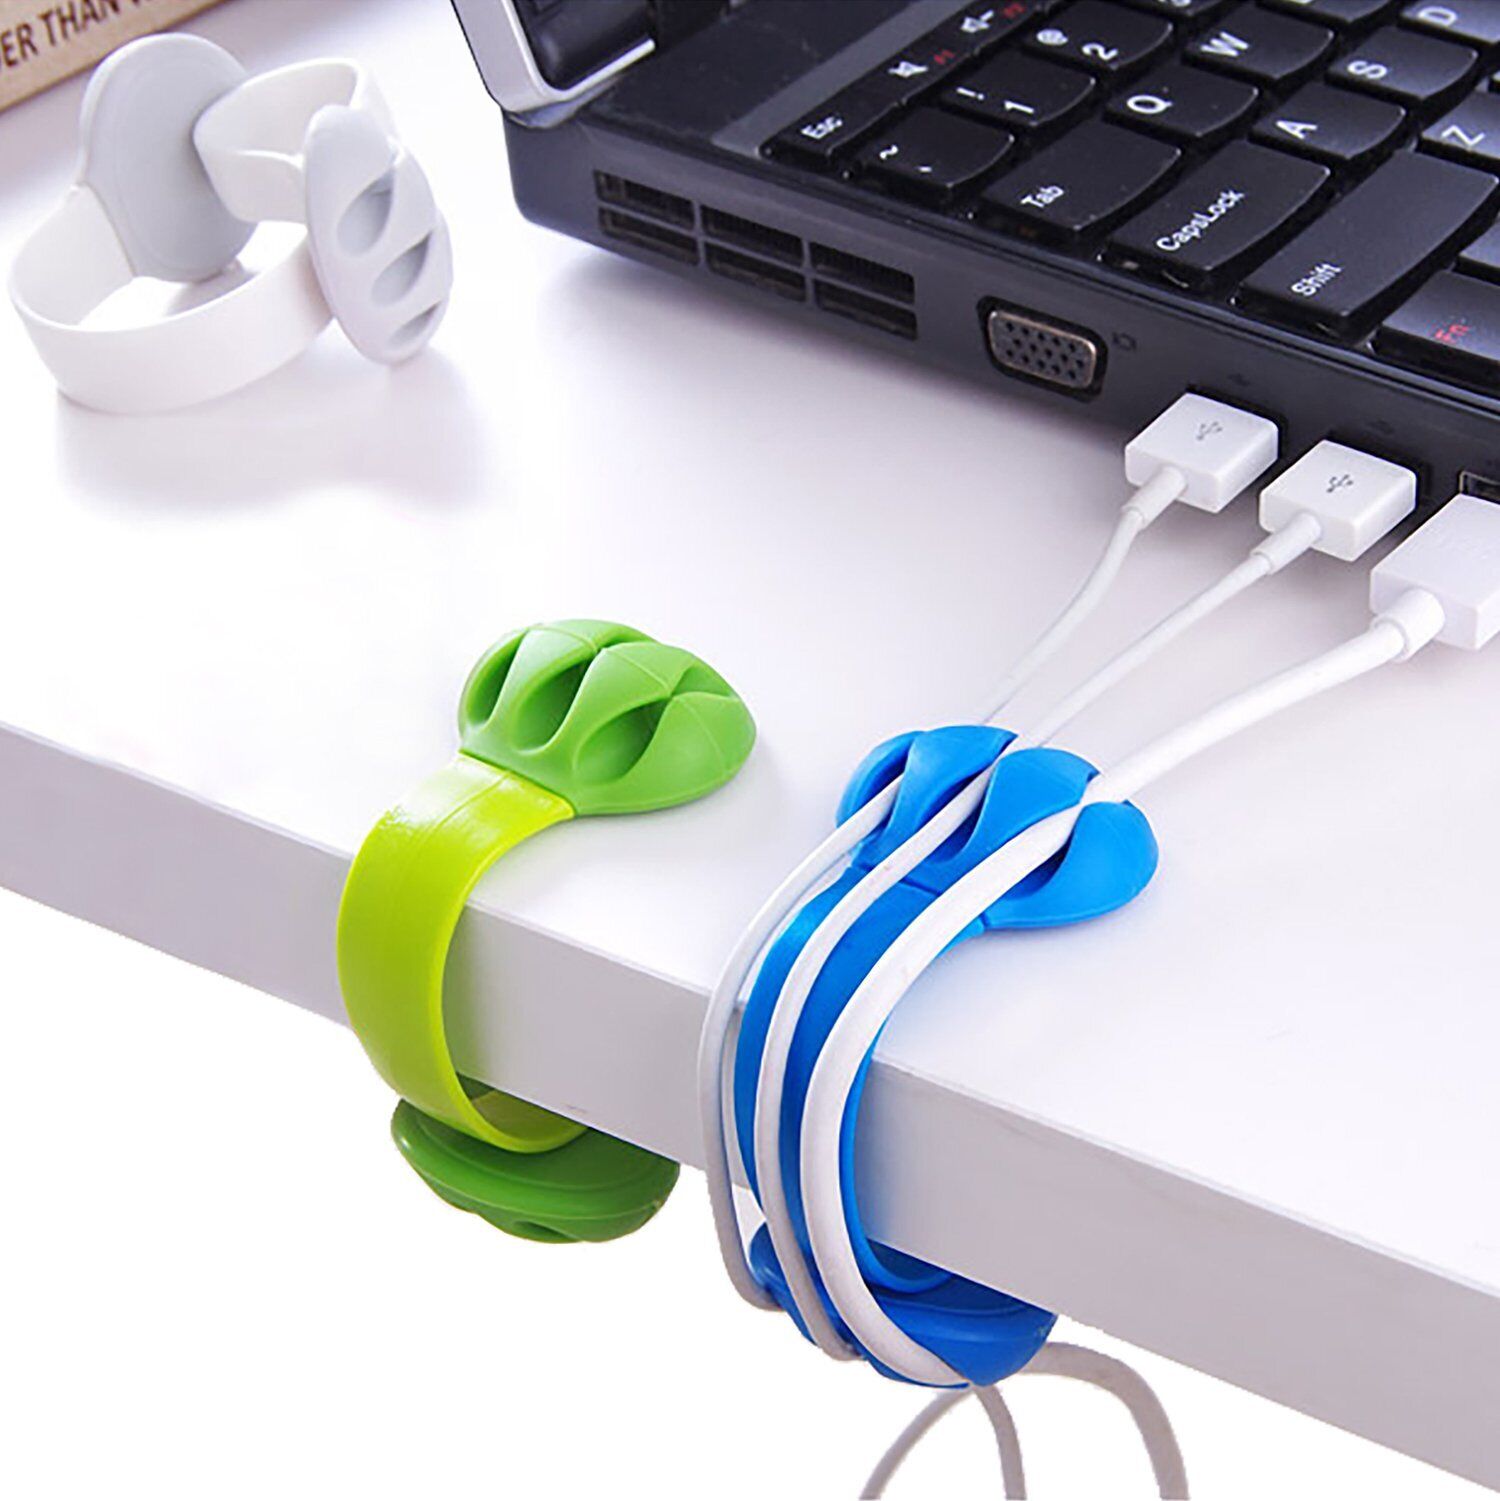 Cable Holder - Cord Organizer - Cable Management Clips - Wire Holder System -...